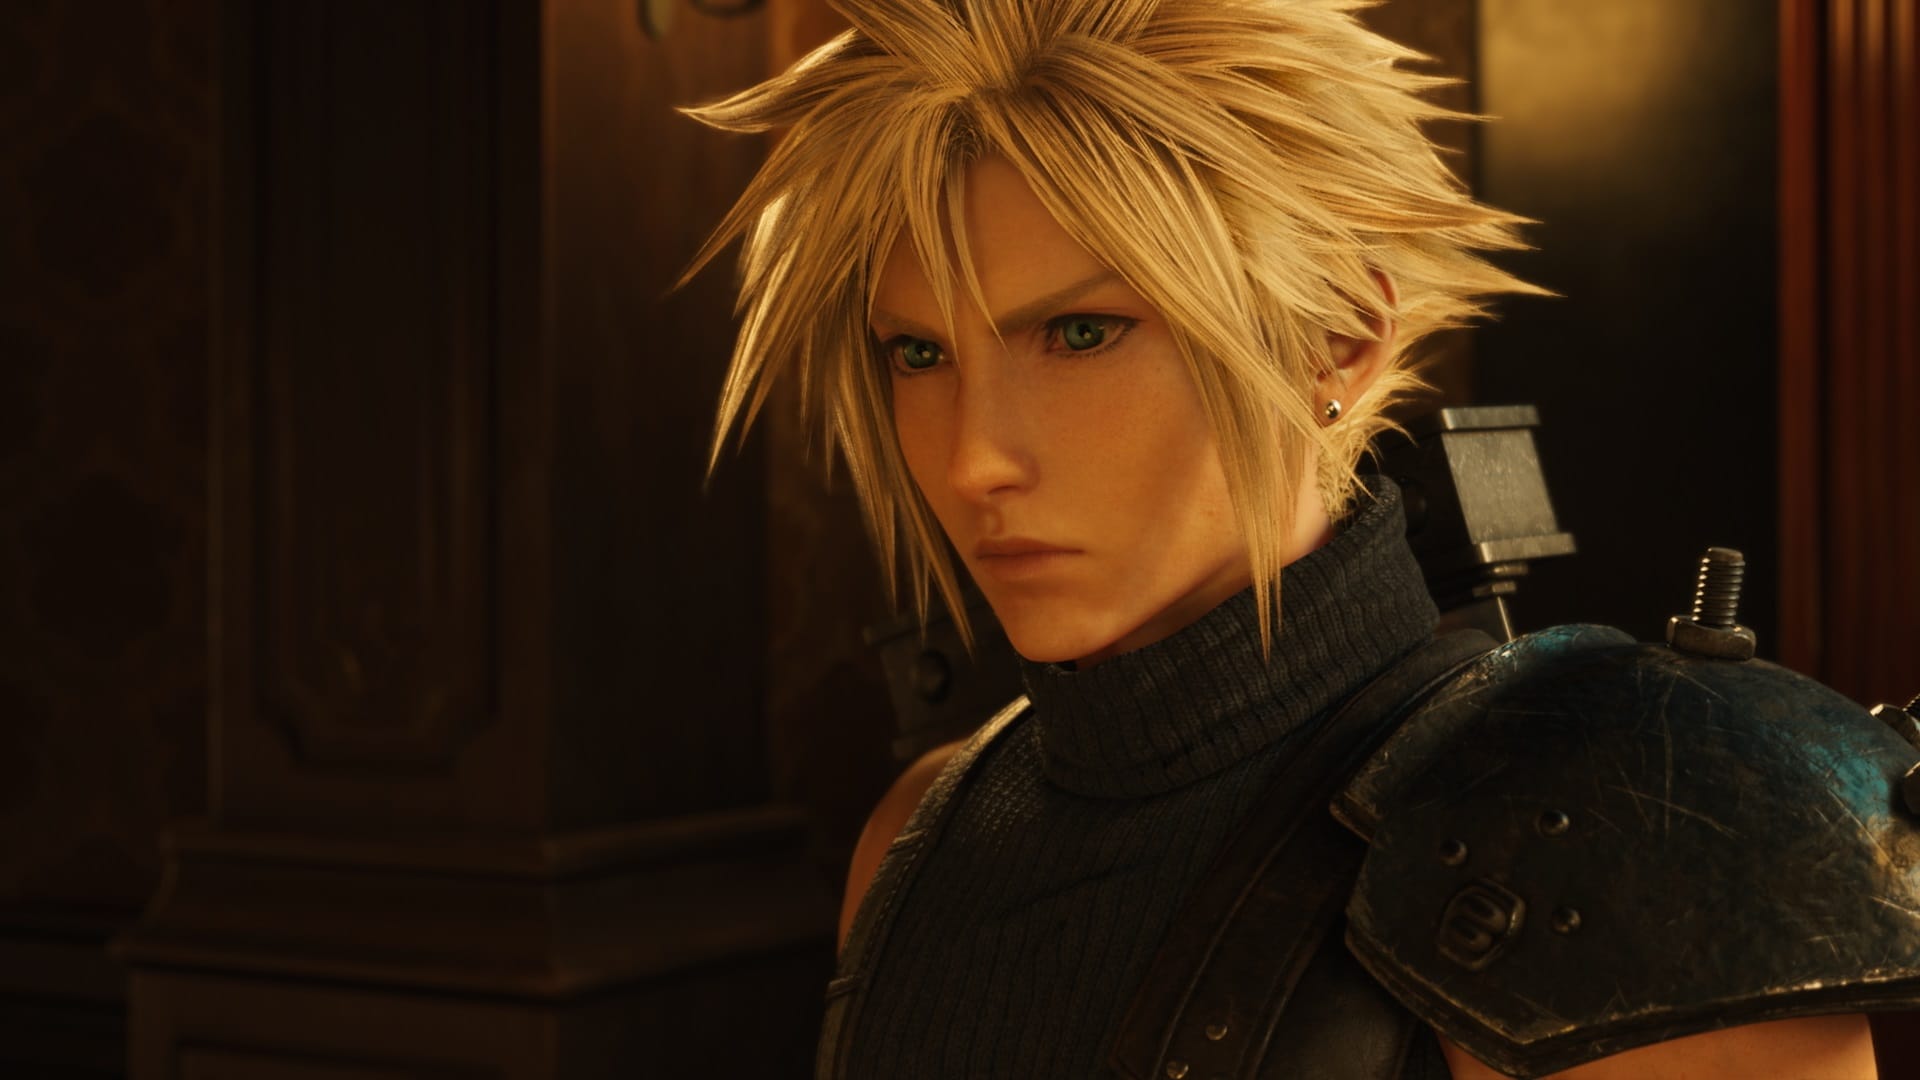 Final Fantasy VII Rebirth Revealed As Name Of Remake Part 2, Part